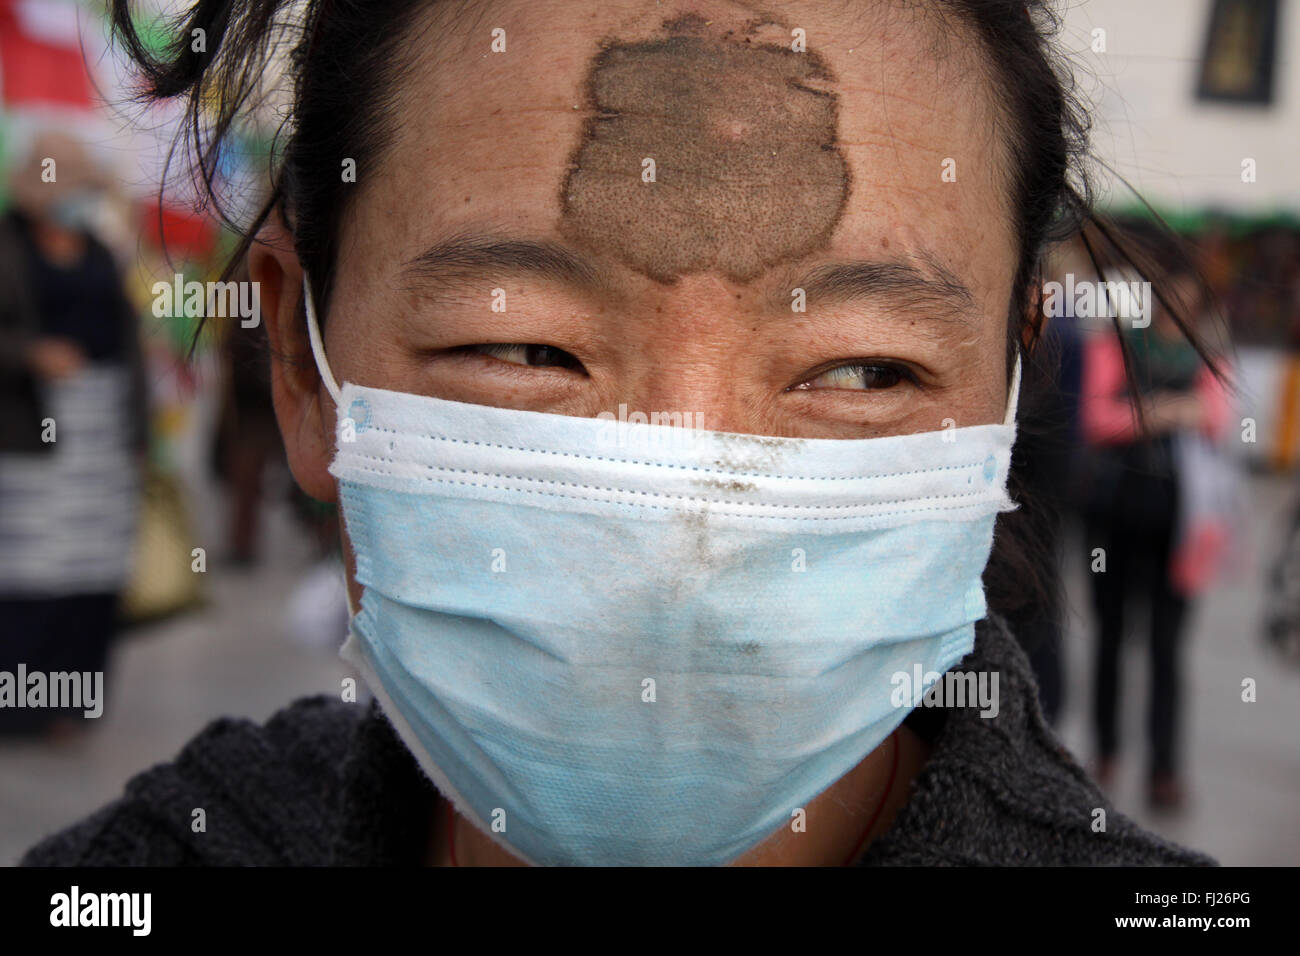 Tibetan woman praying with mud on her forehead as she prays on the floor in Lhasa , Tibet Stock Photo